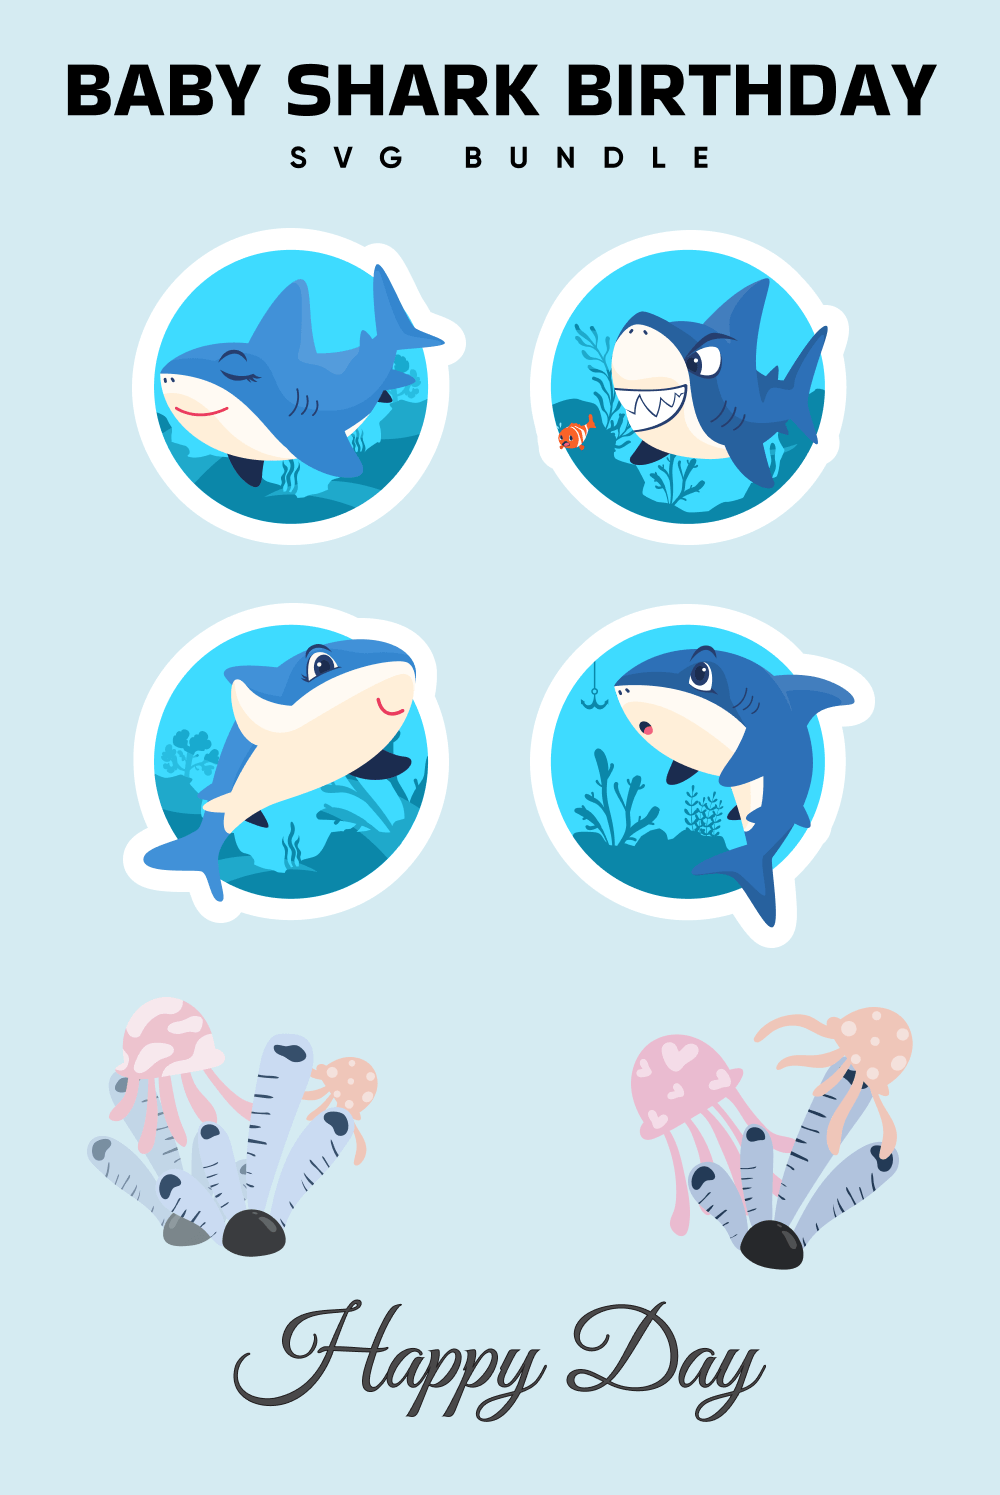 Collage of images of a cheerful blue shark in circles.